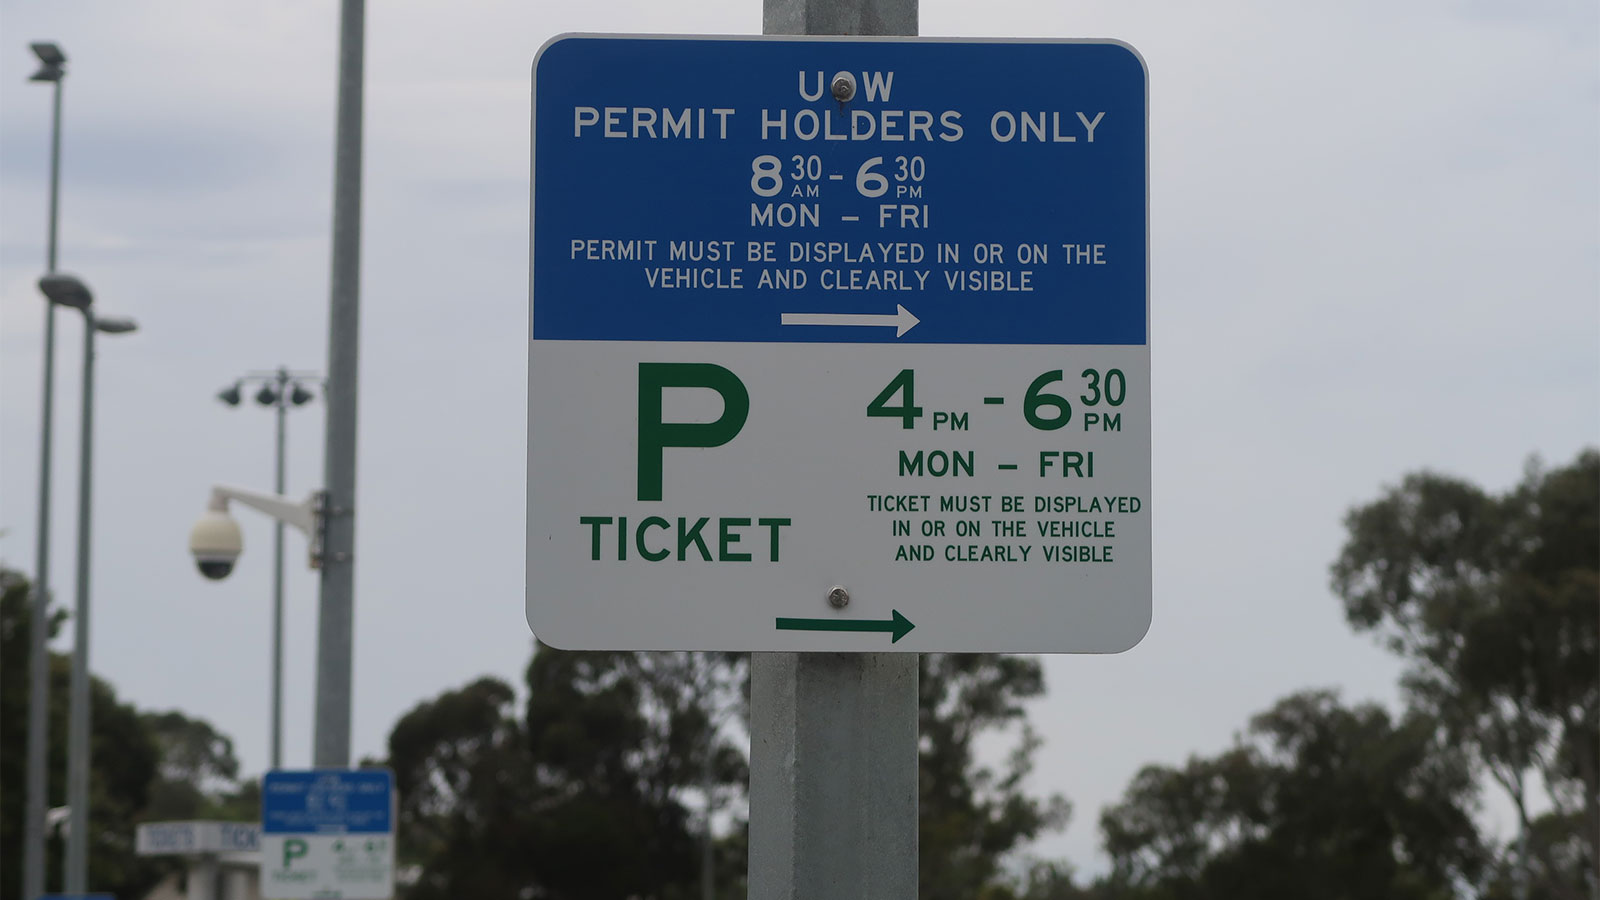 P5 permit and ticket parking sign